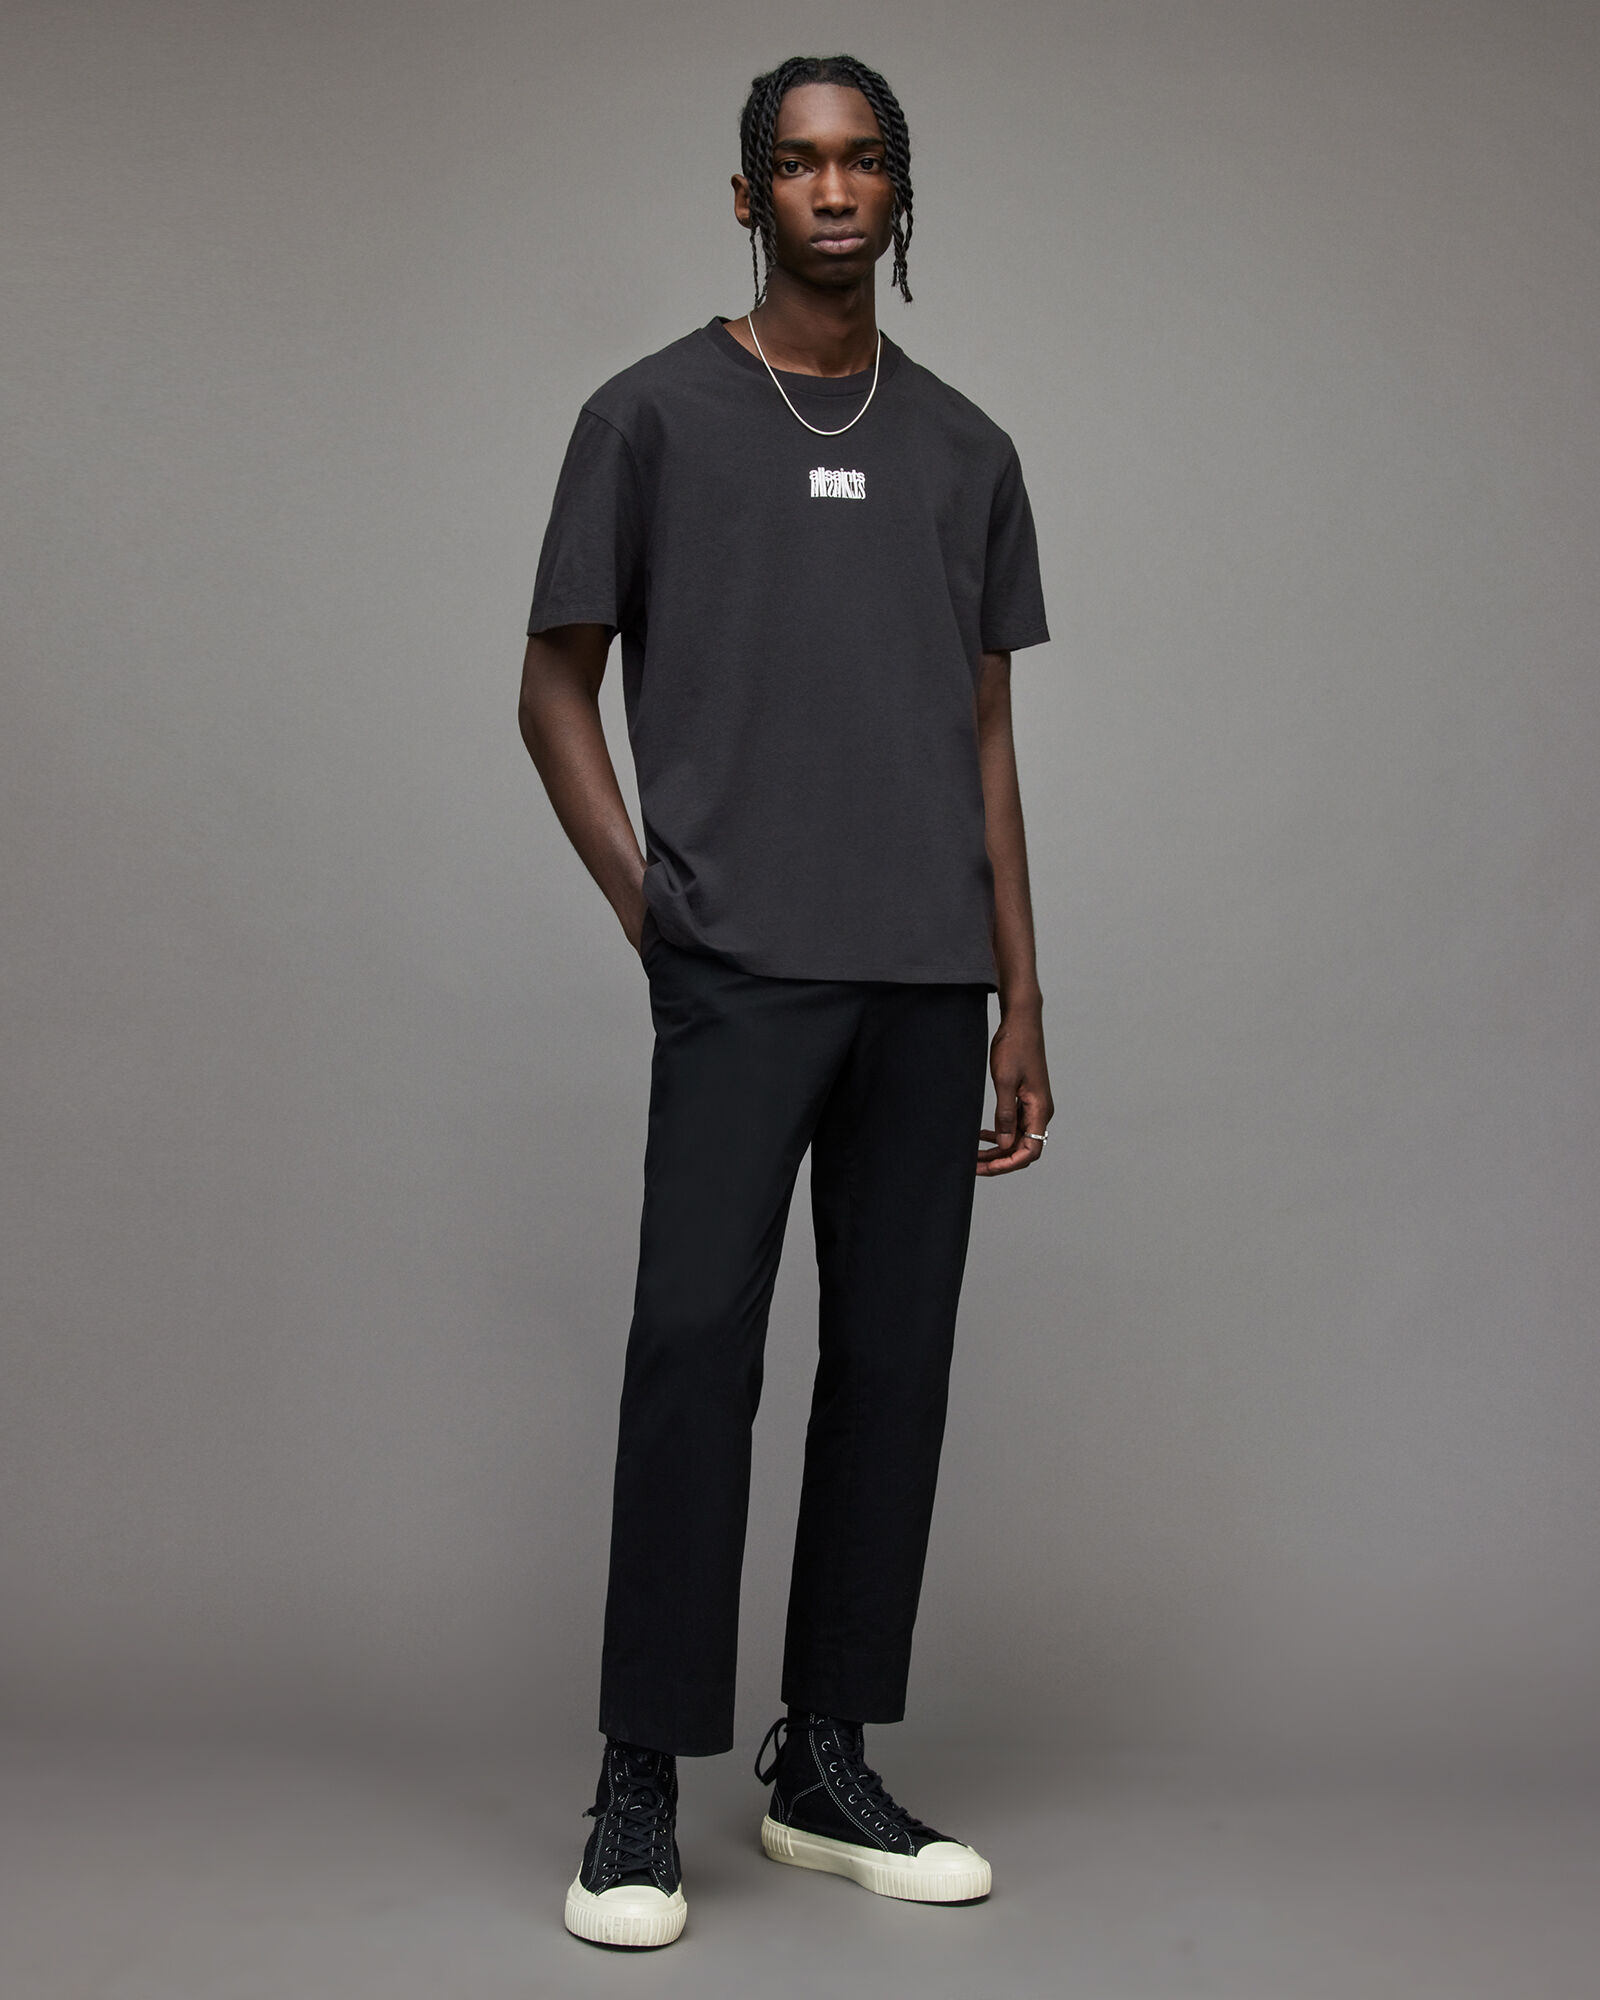 Refract Crew T-Shirt Washed Black | ALLSAINTS